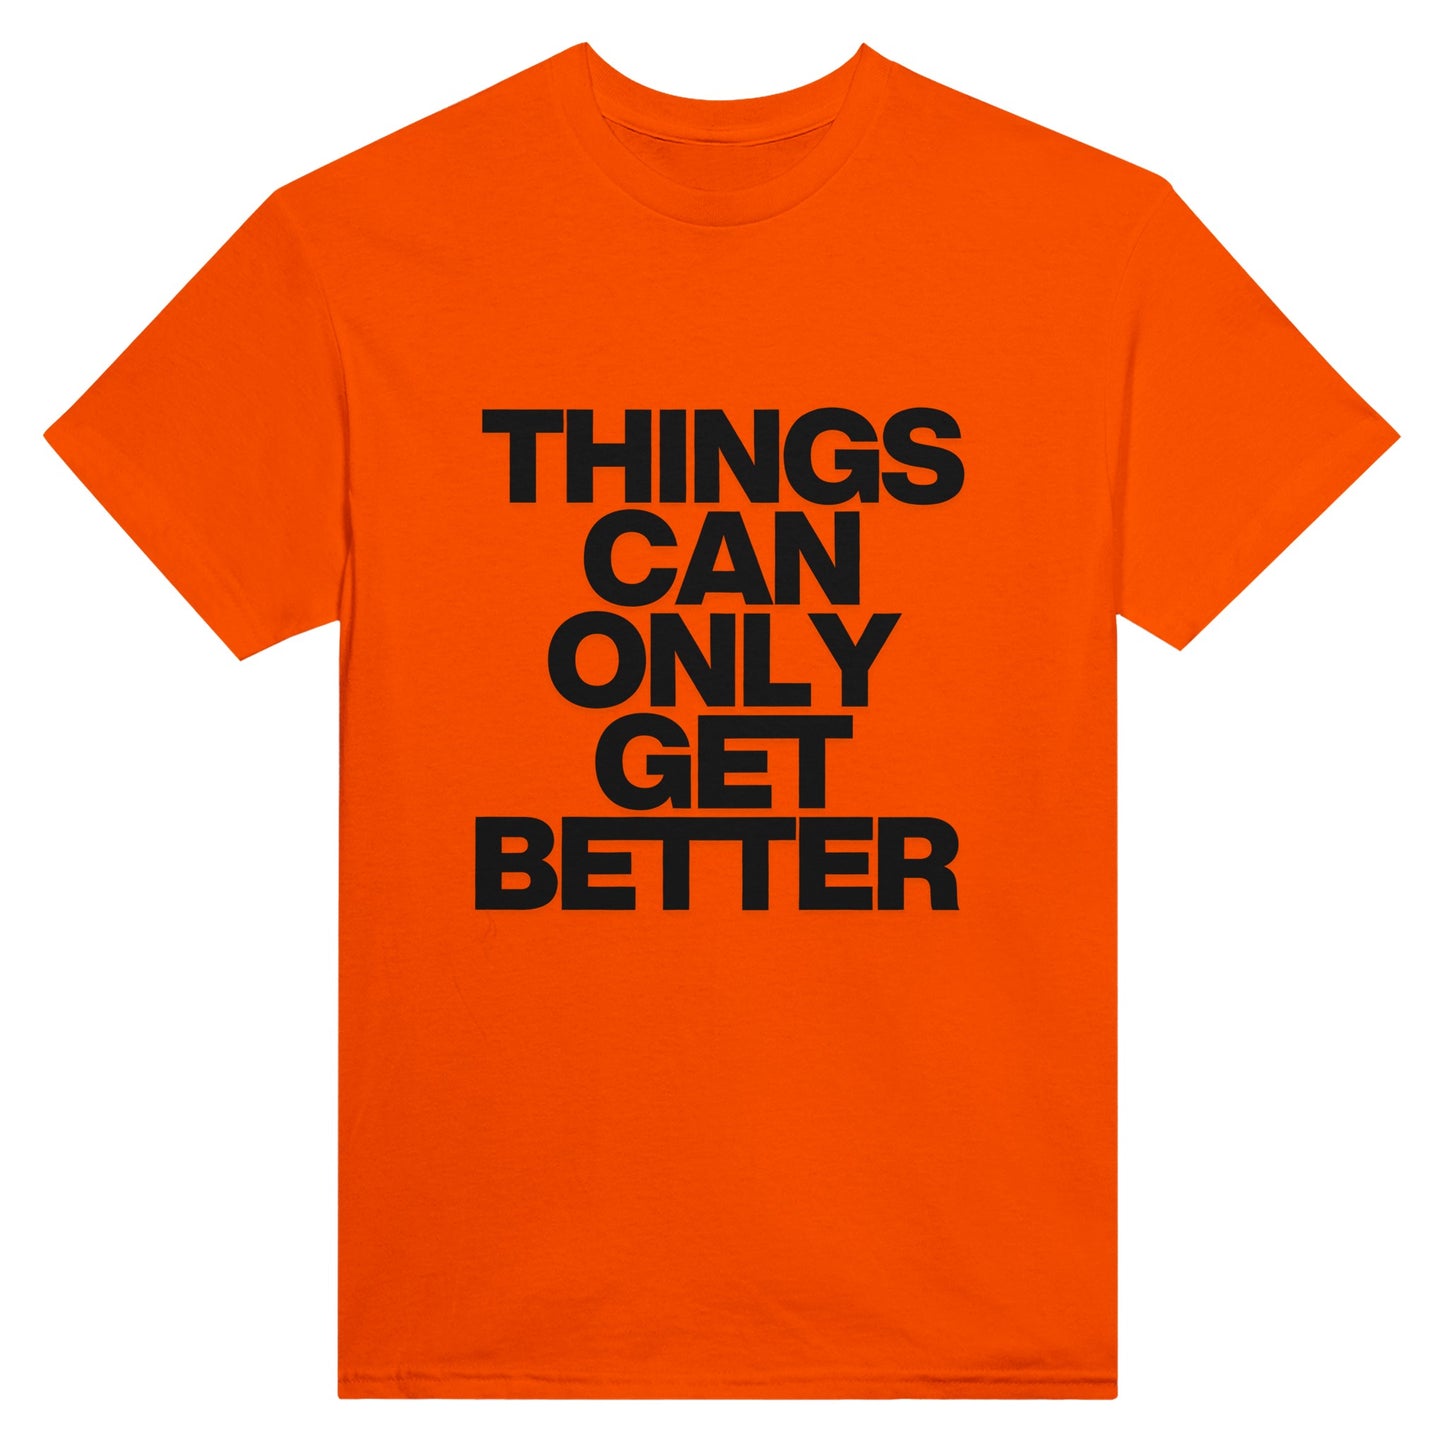 Things Can Only Get Better T-shirt in orange - anti-tory election wear